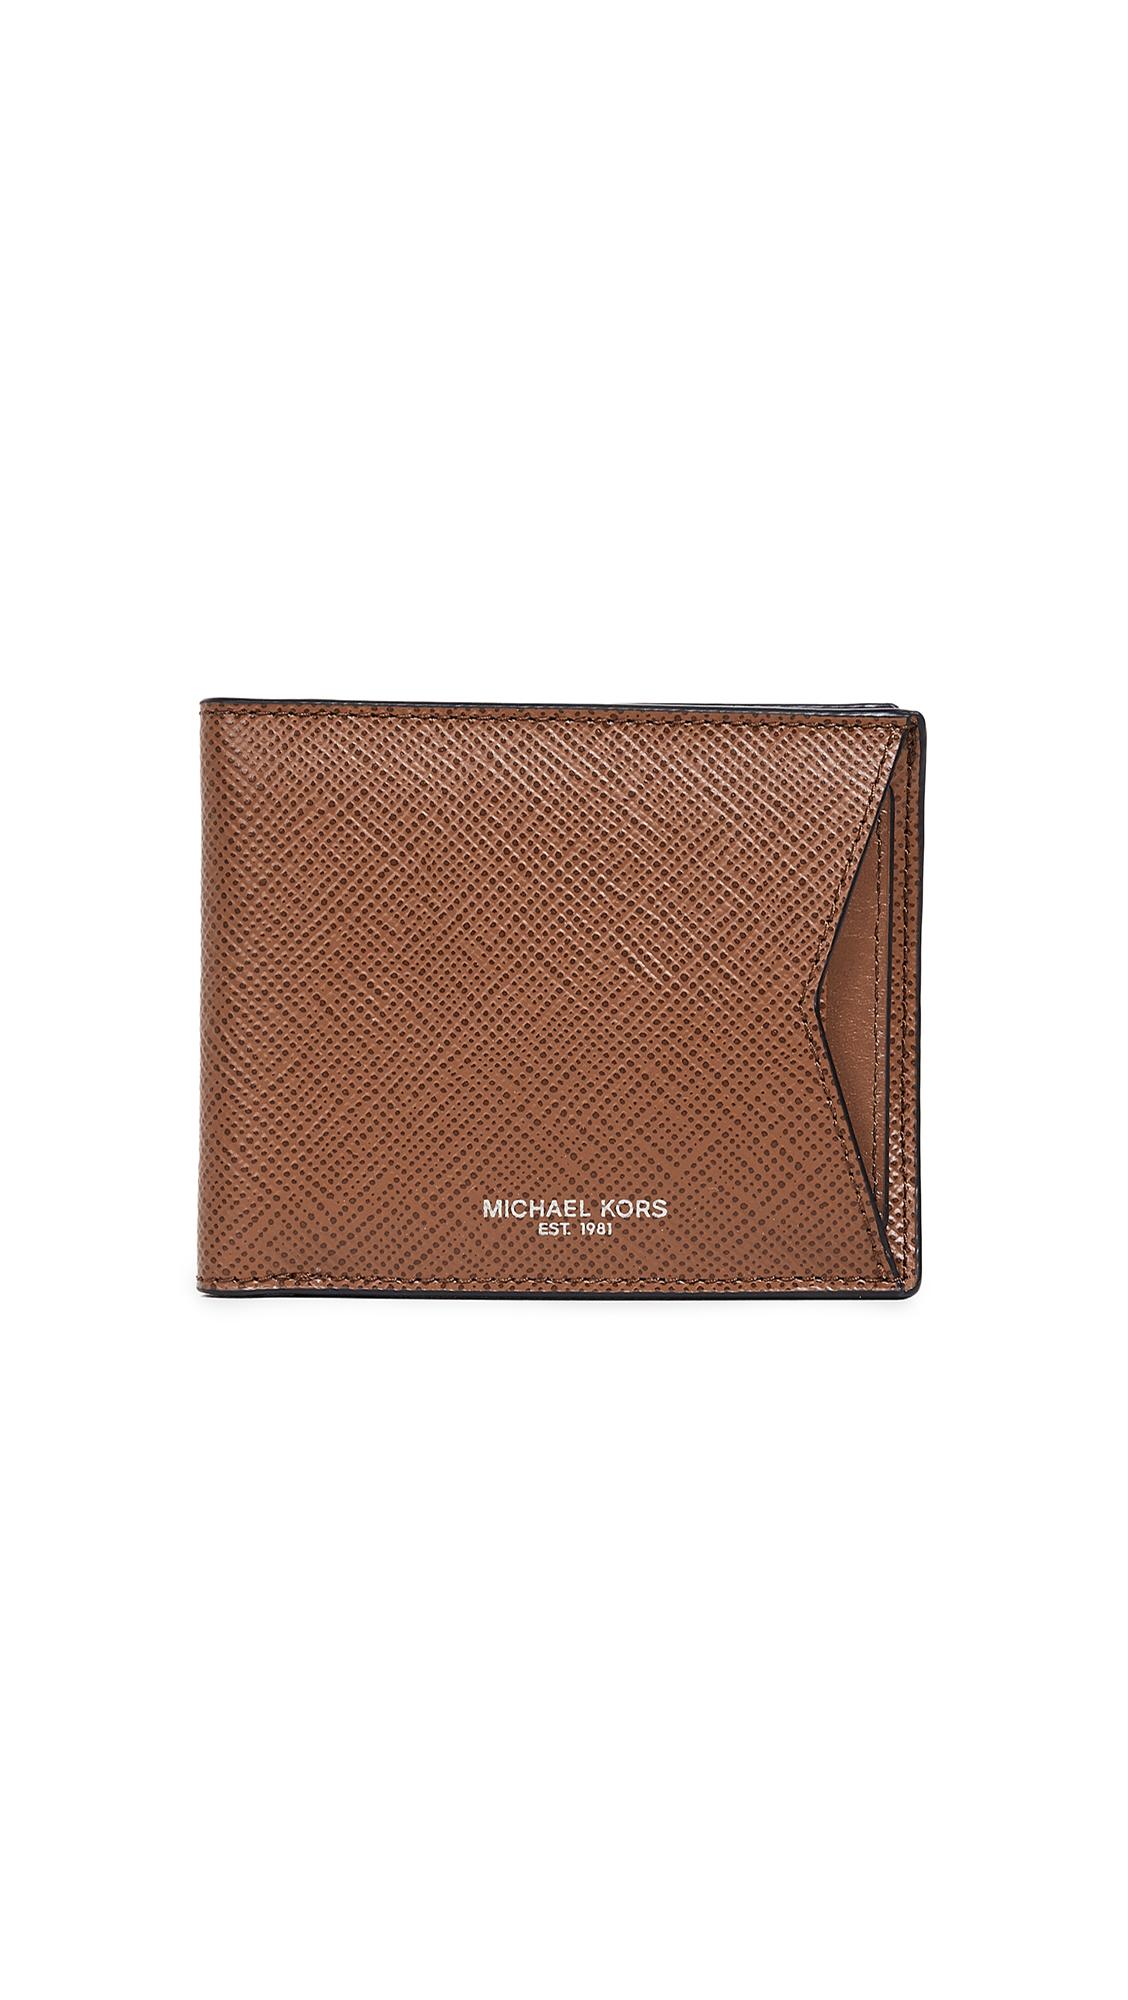 Michael Kors Harrison Wallet With Card Case in Brown for Men - Lyst